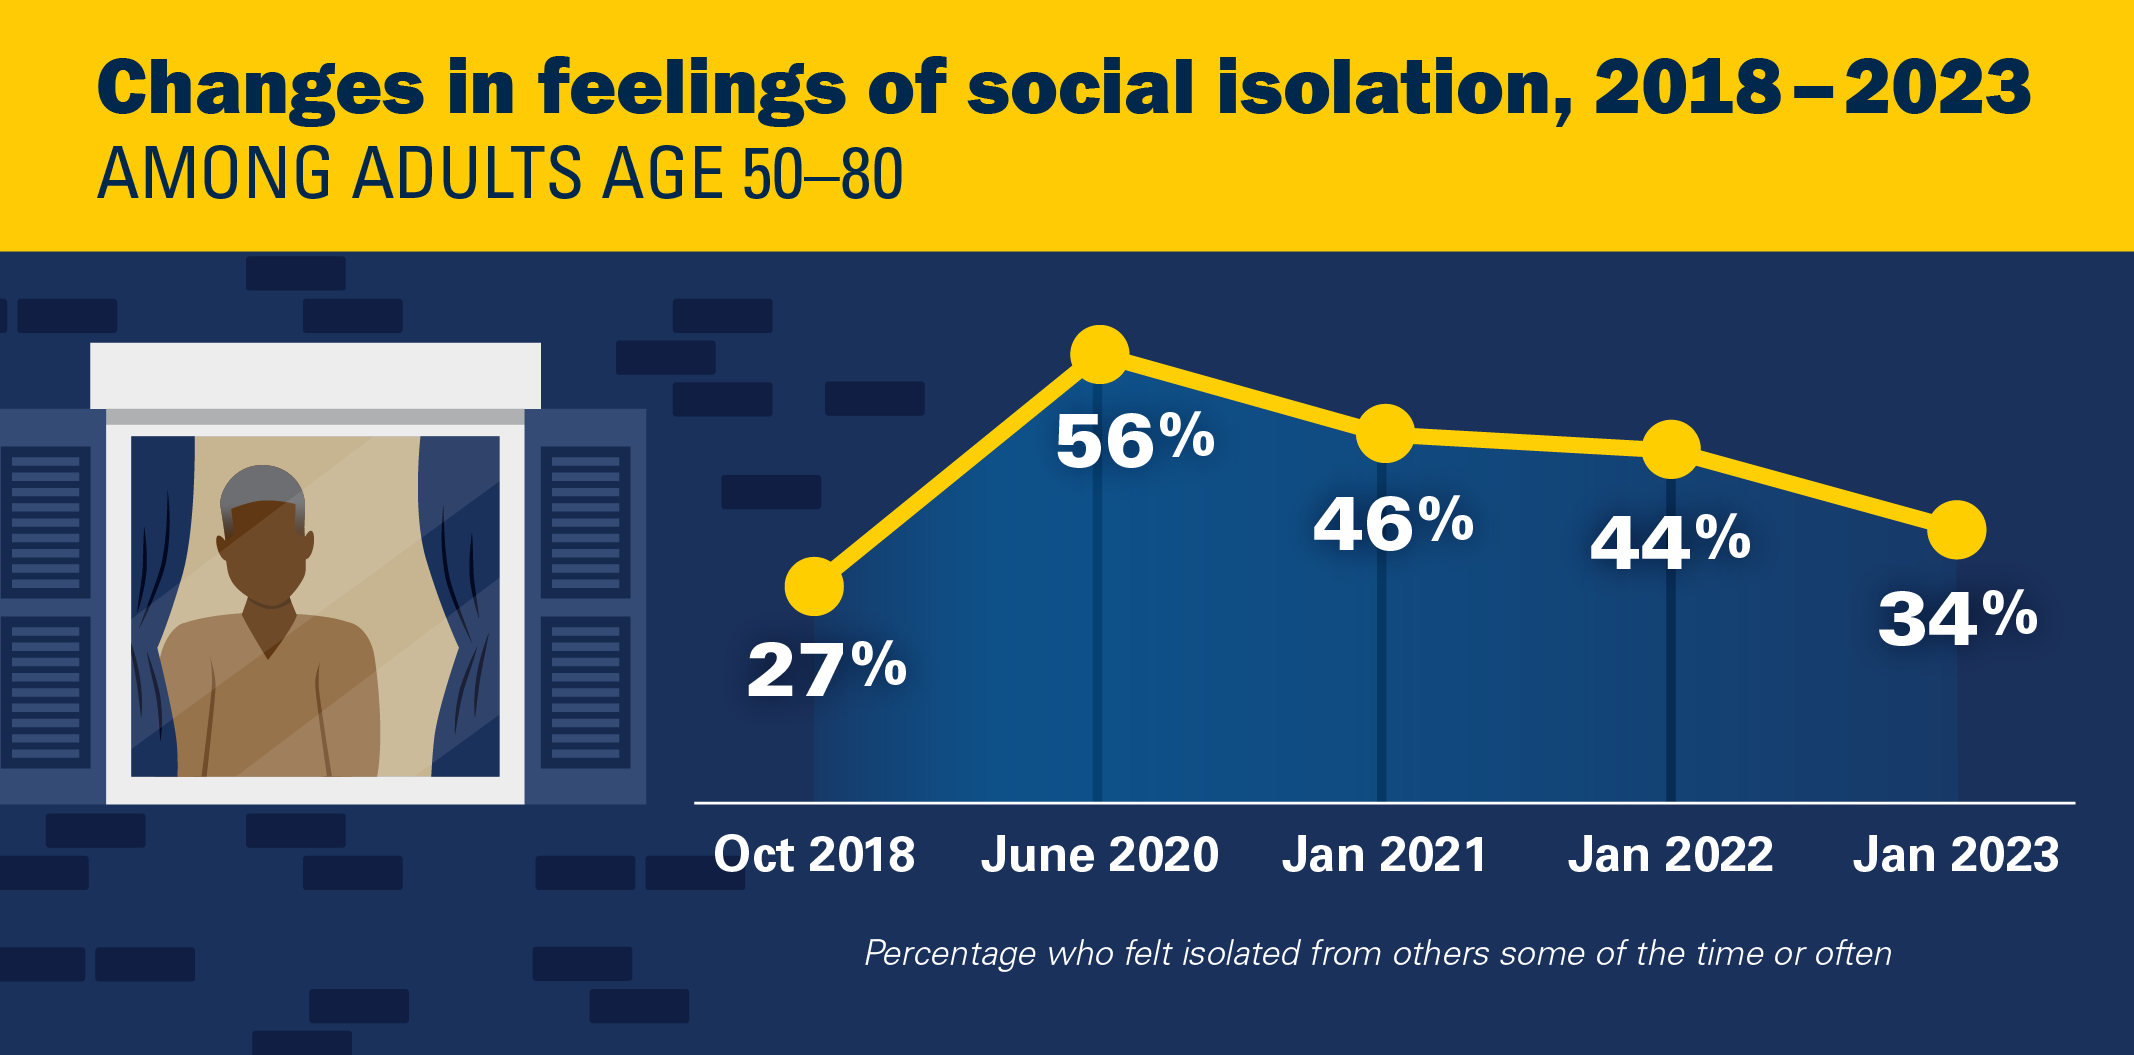 Changes in feelings of social isolation, 2018-2023